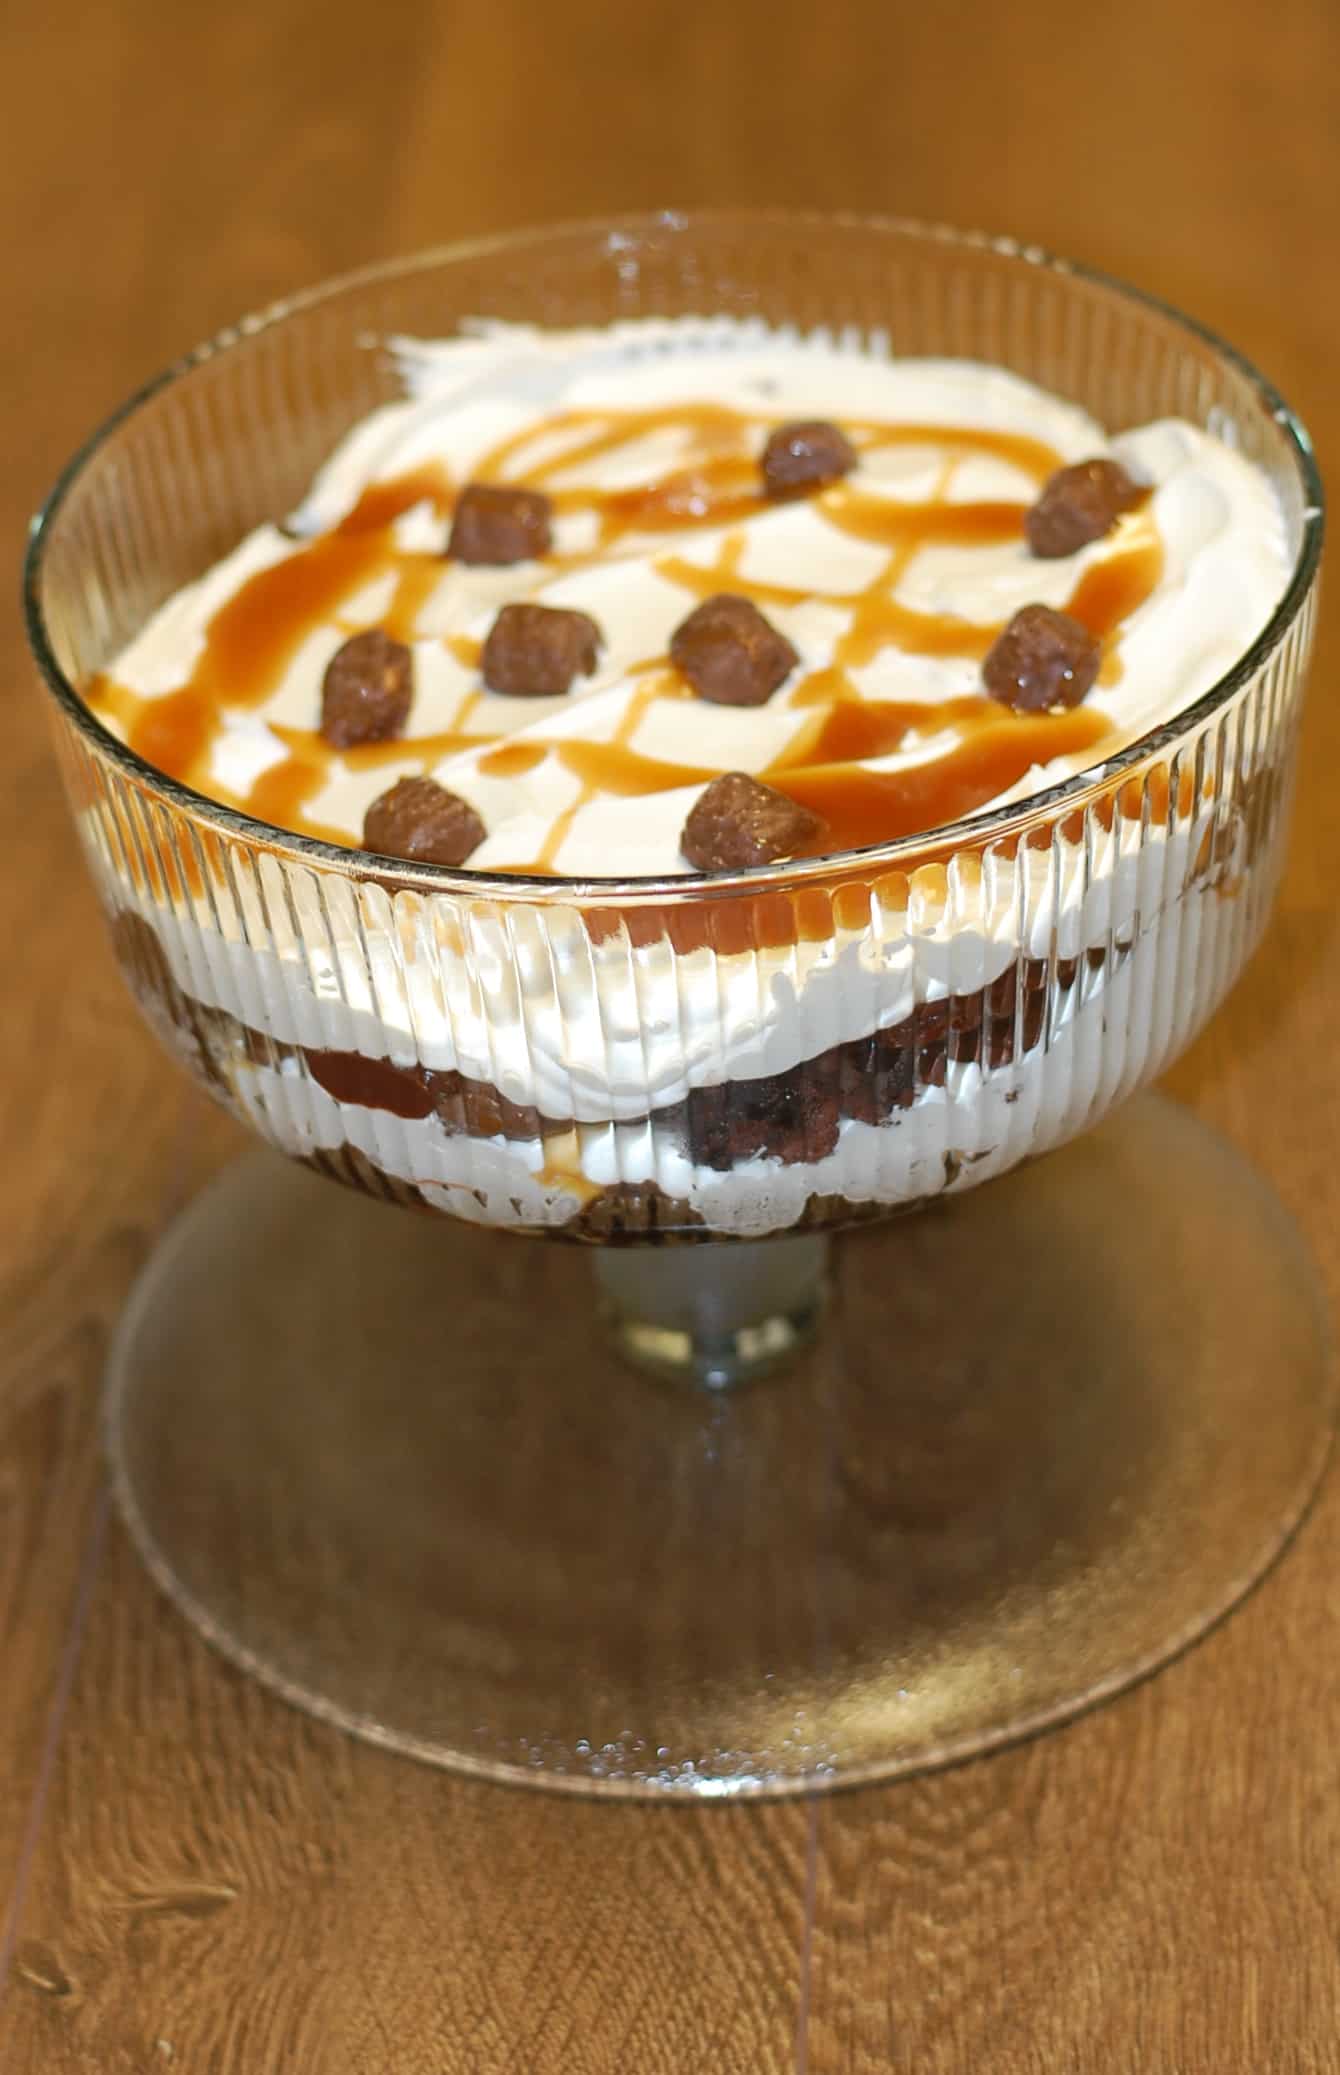 Dessert Made With TWIX Bites: Delicious Chocolate Trifle Recipe with a famous candy bar ingredient! The flavors match each other! #EatMoreBites #Shop